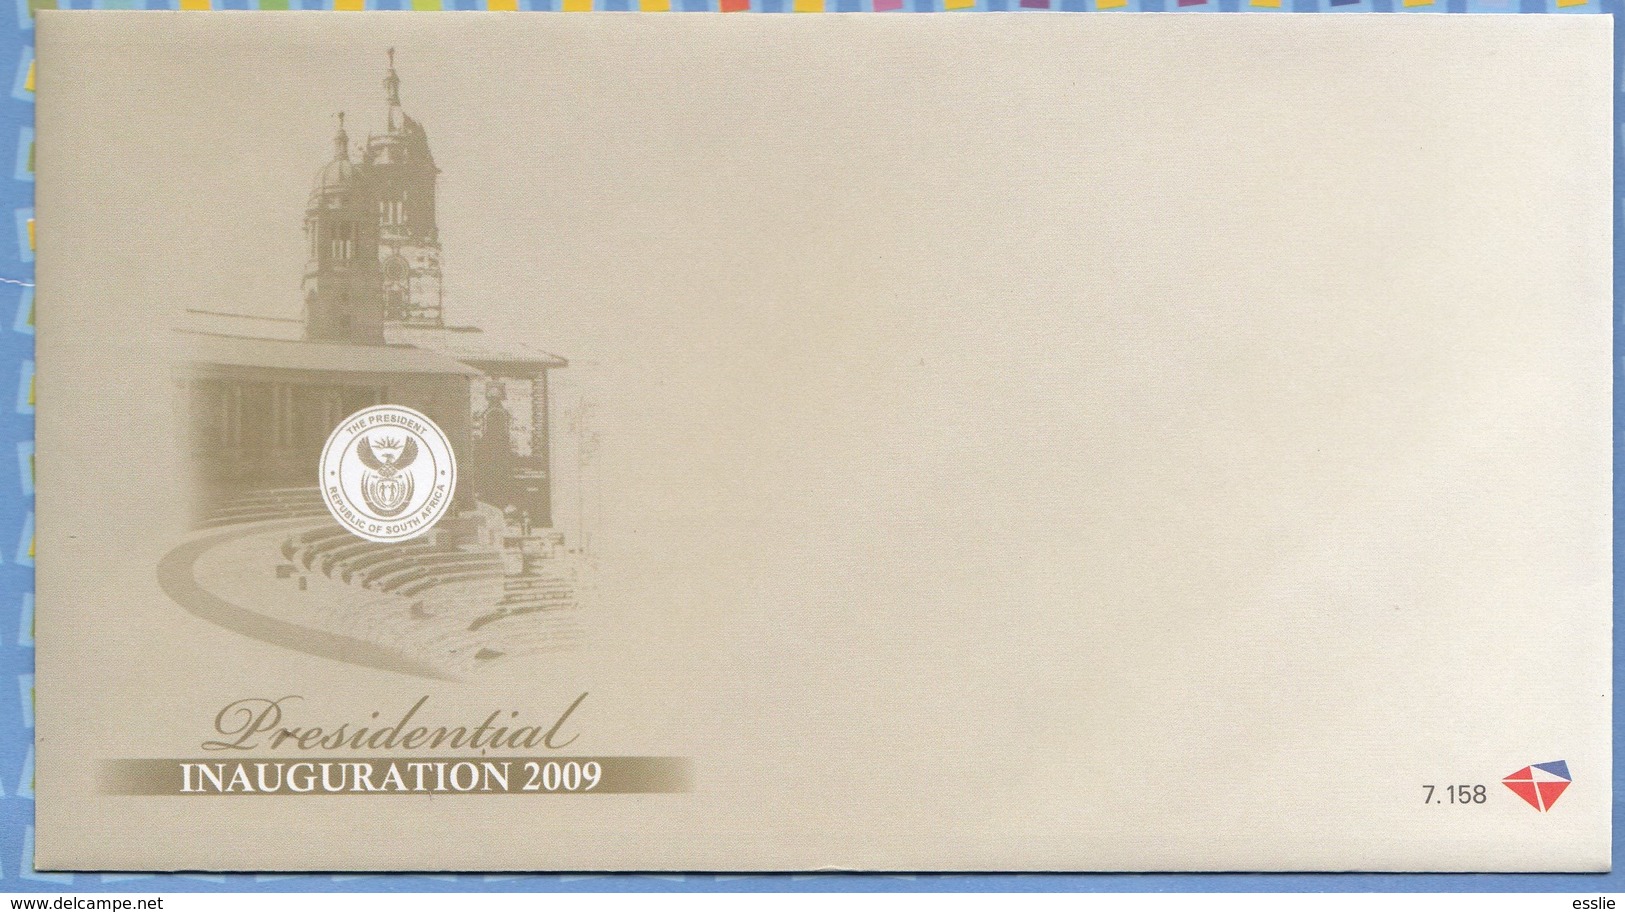 South Africa RSA - 2009 - FDC 7.158 - President Jacob Zuma Inauguration - Unserviced Cover - Covers & Documents